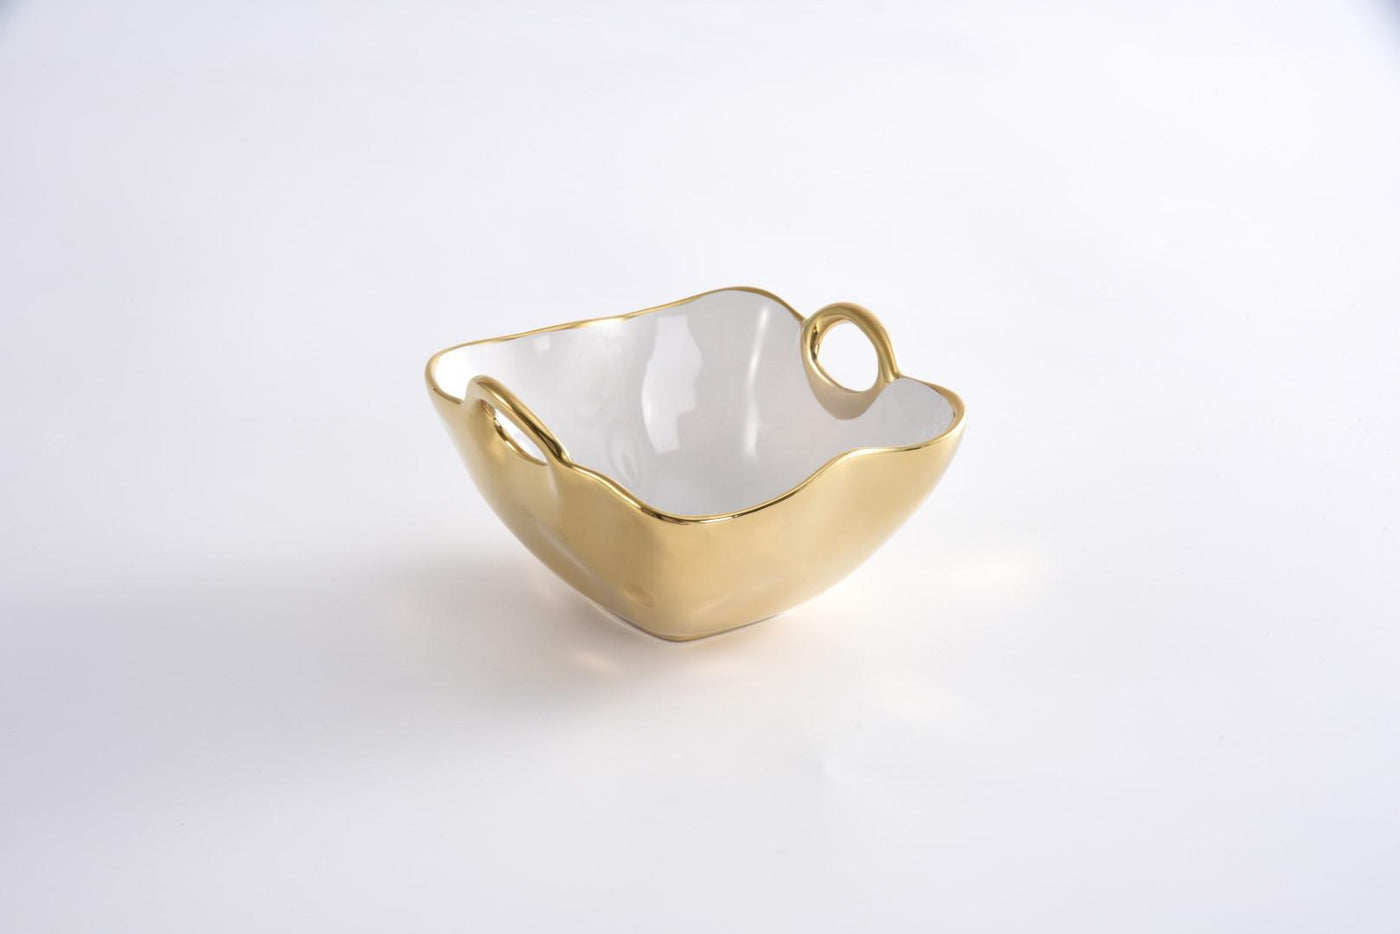 Pampa Bay Square Snack Bowl (1 count) - Set With Style